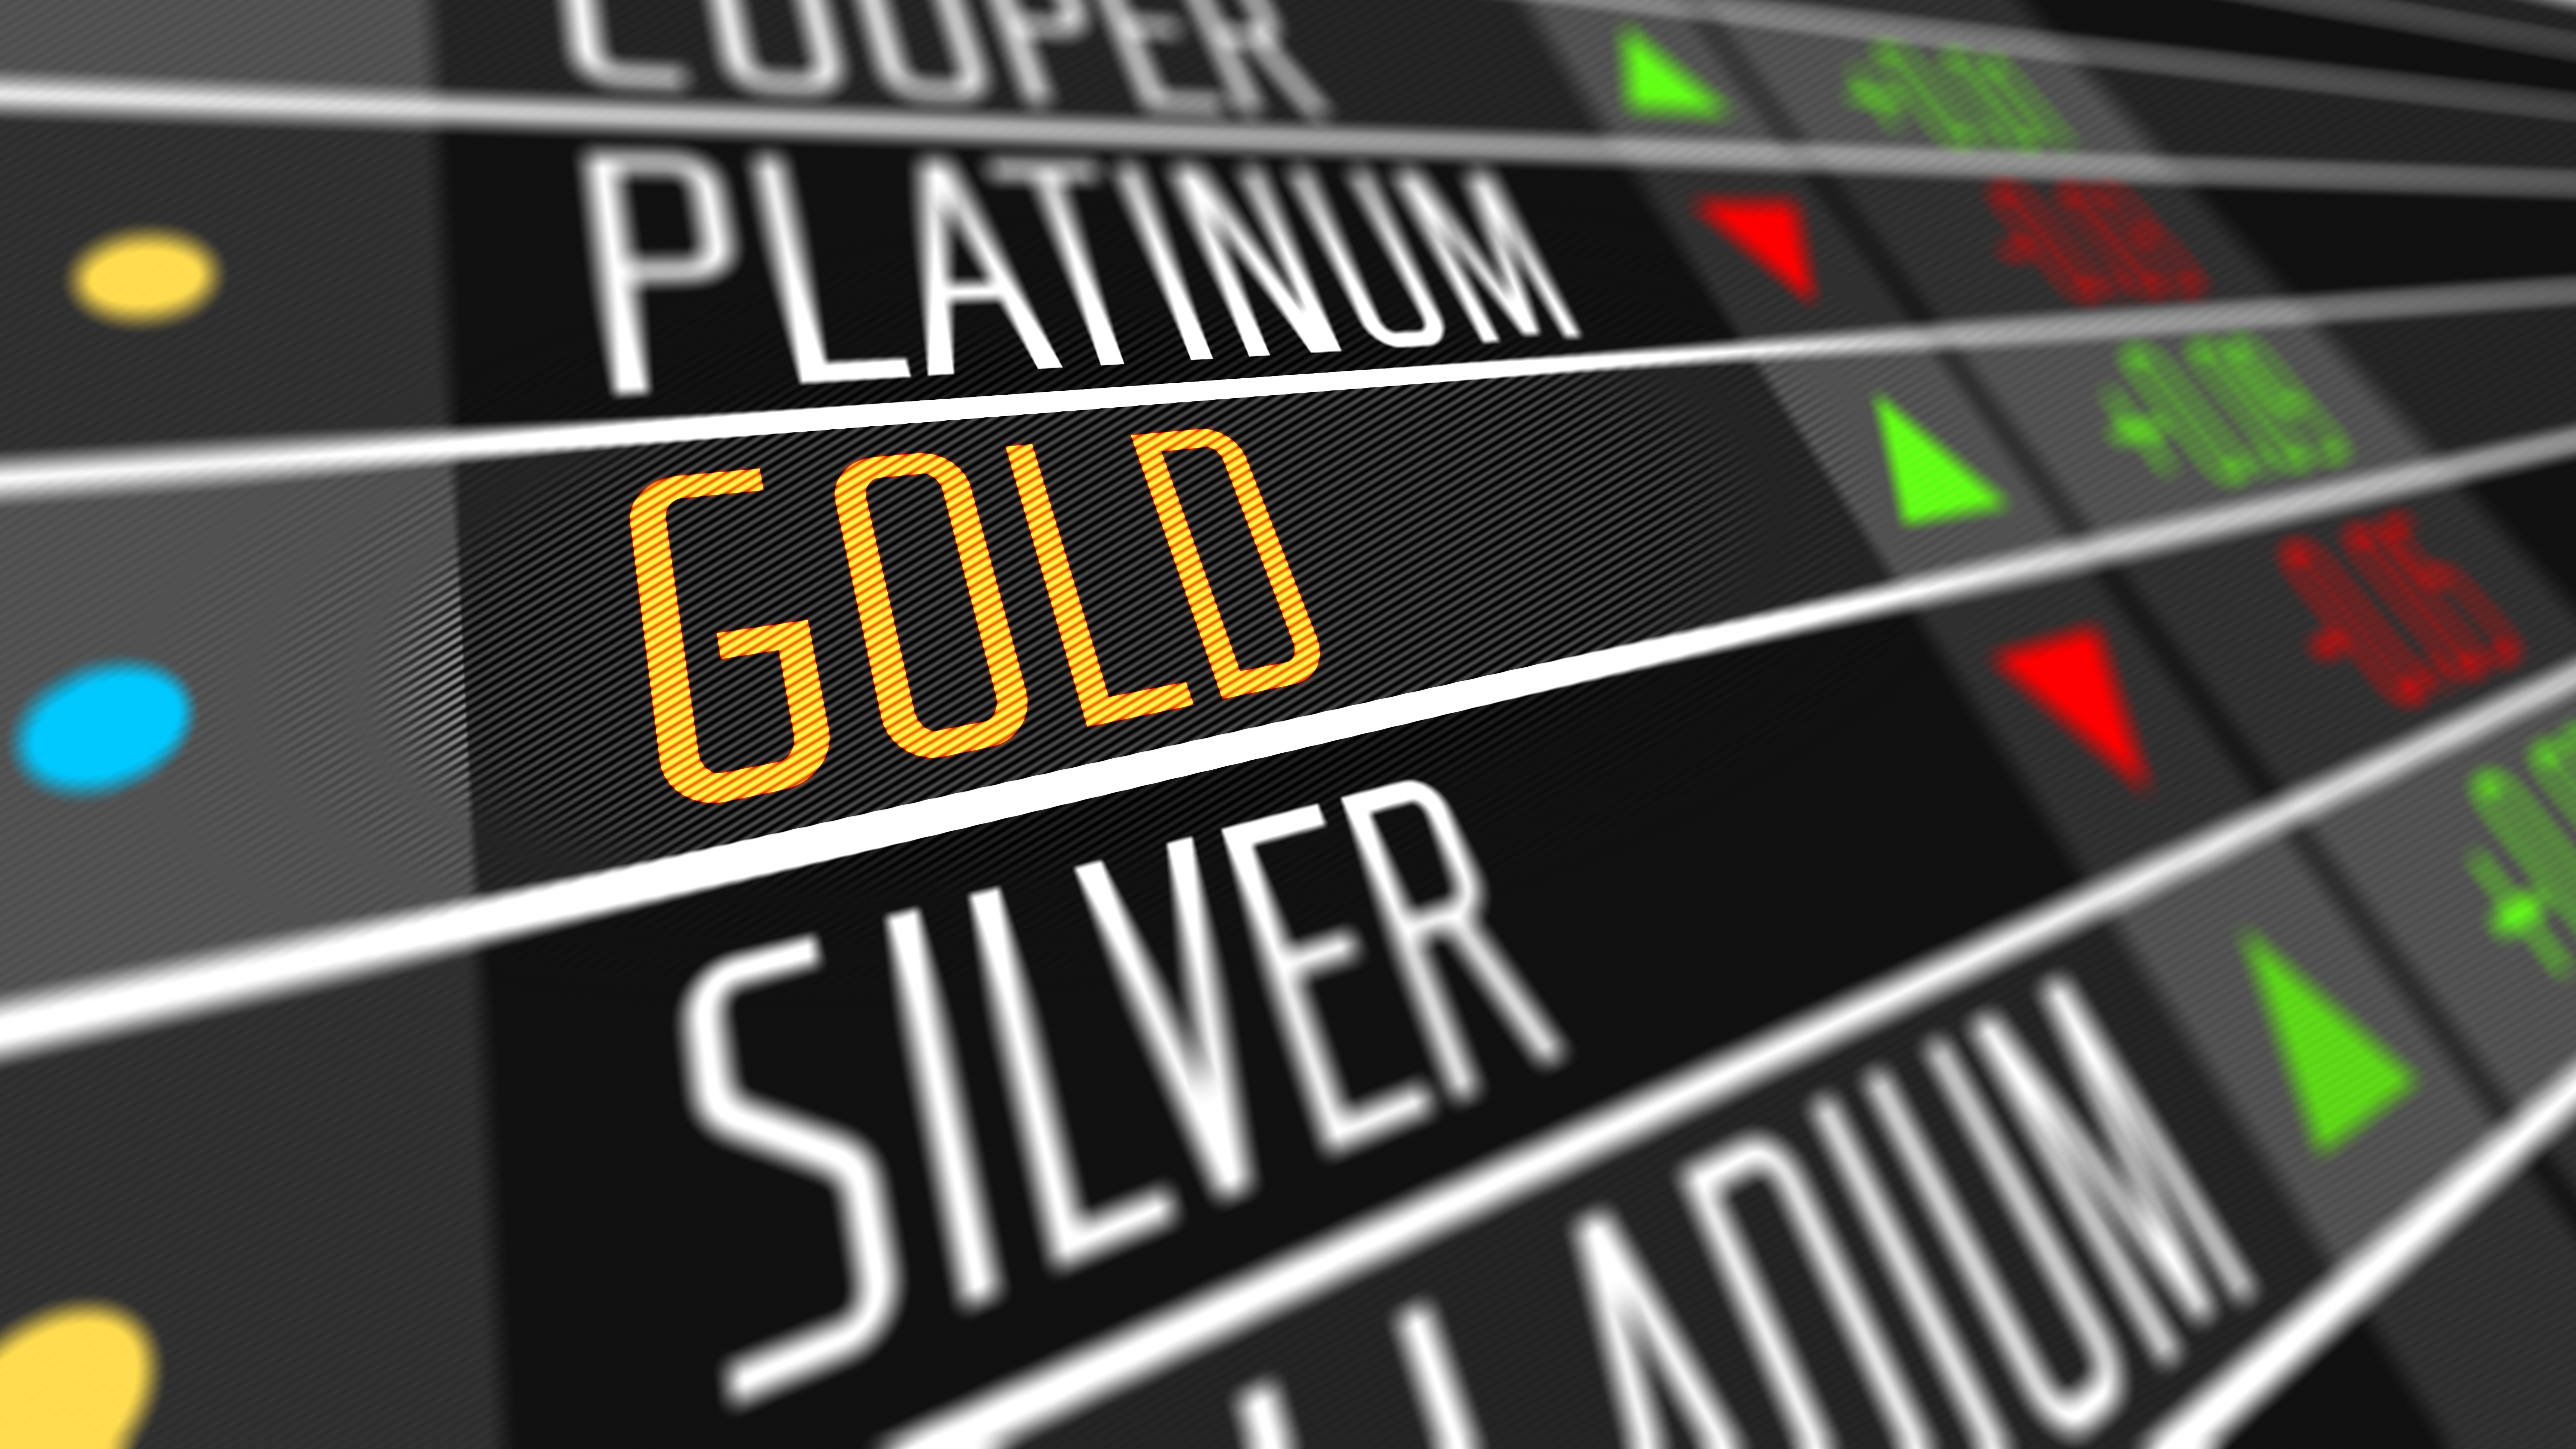 Analysis Gold price causes change in market - Forextraders.com